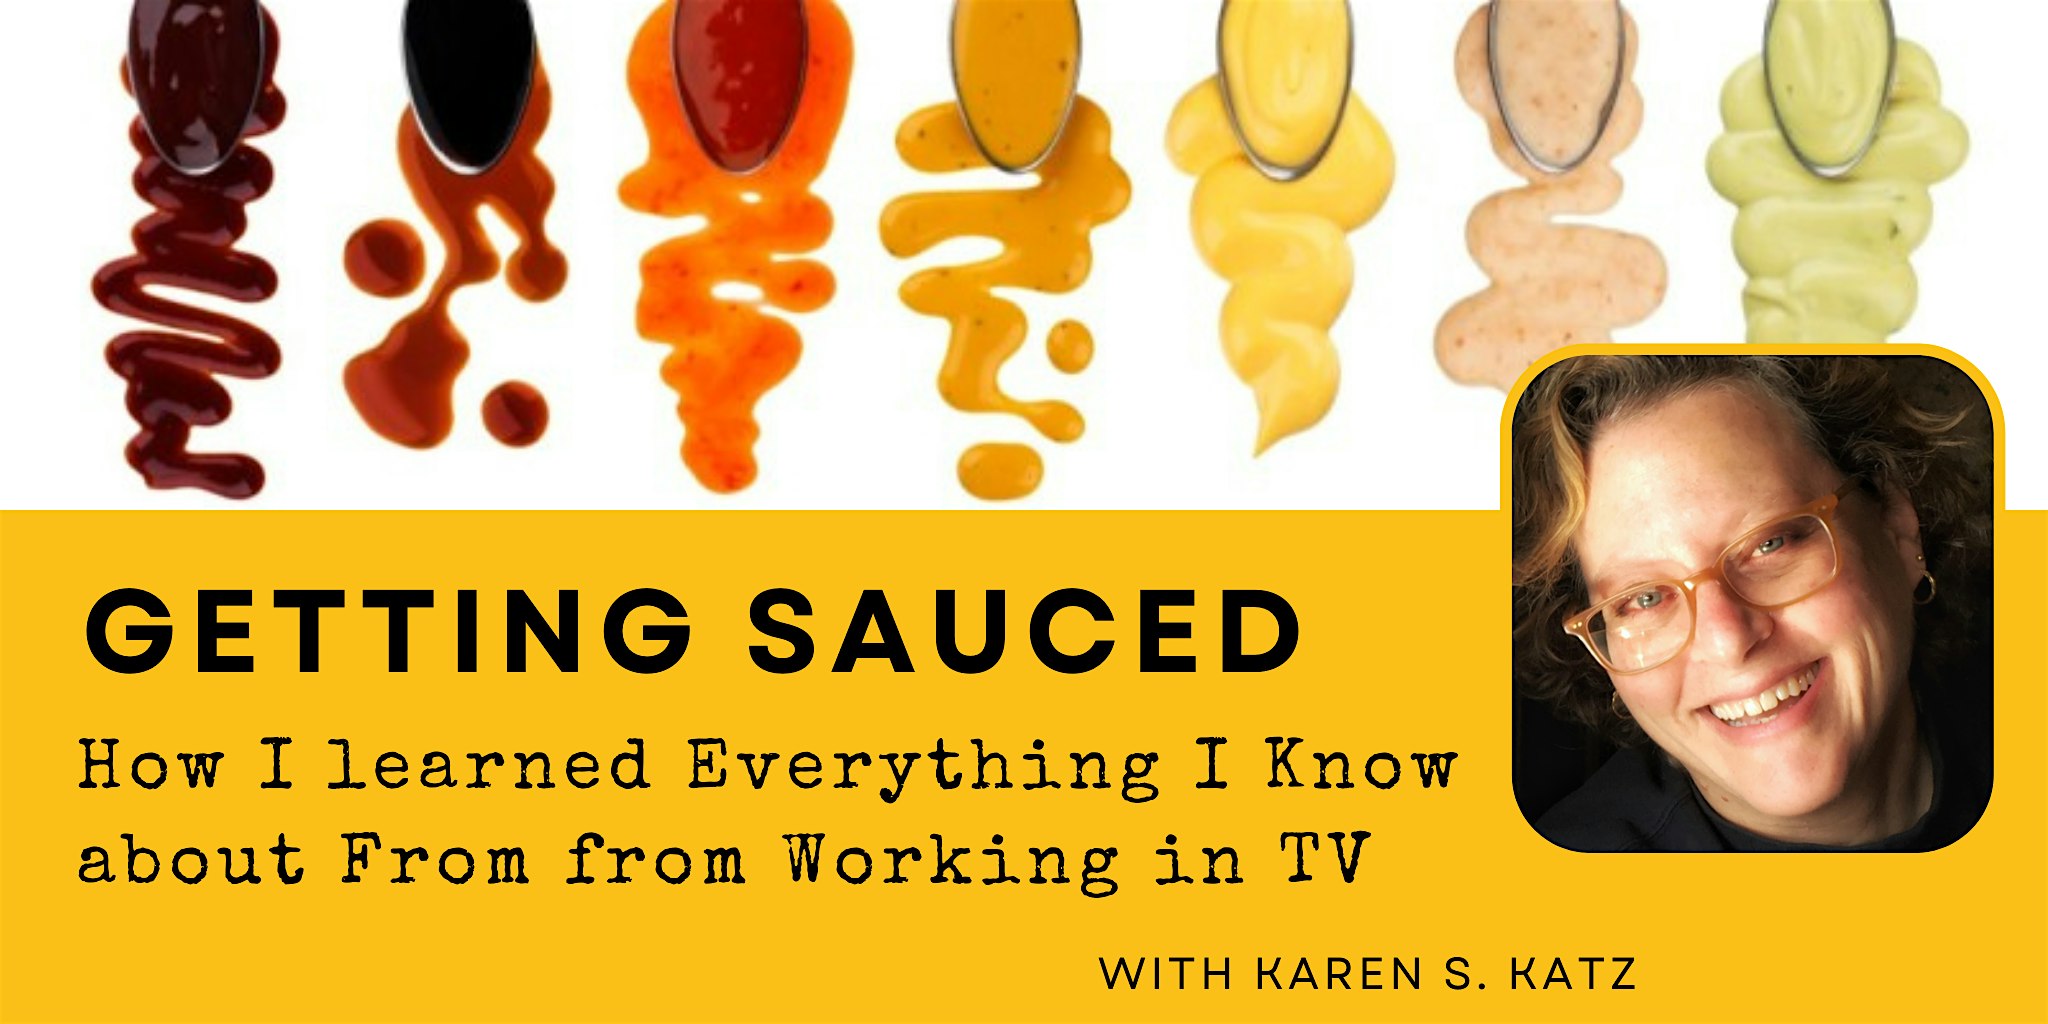 Getting Sauced: Behind the Scenes of Food Television - with Karen Katz